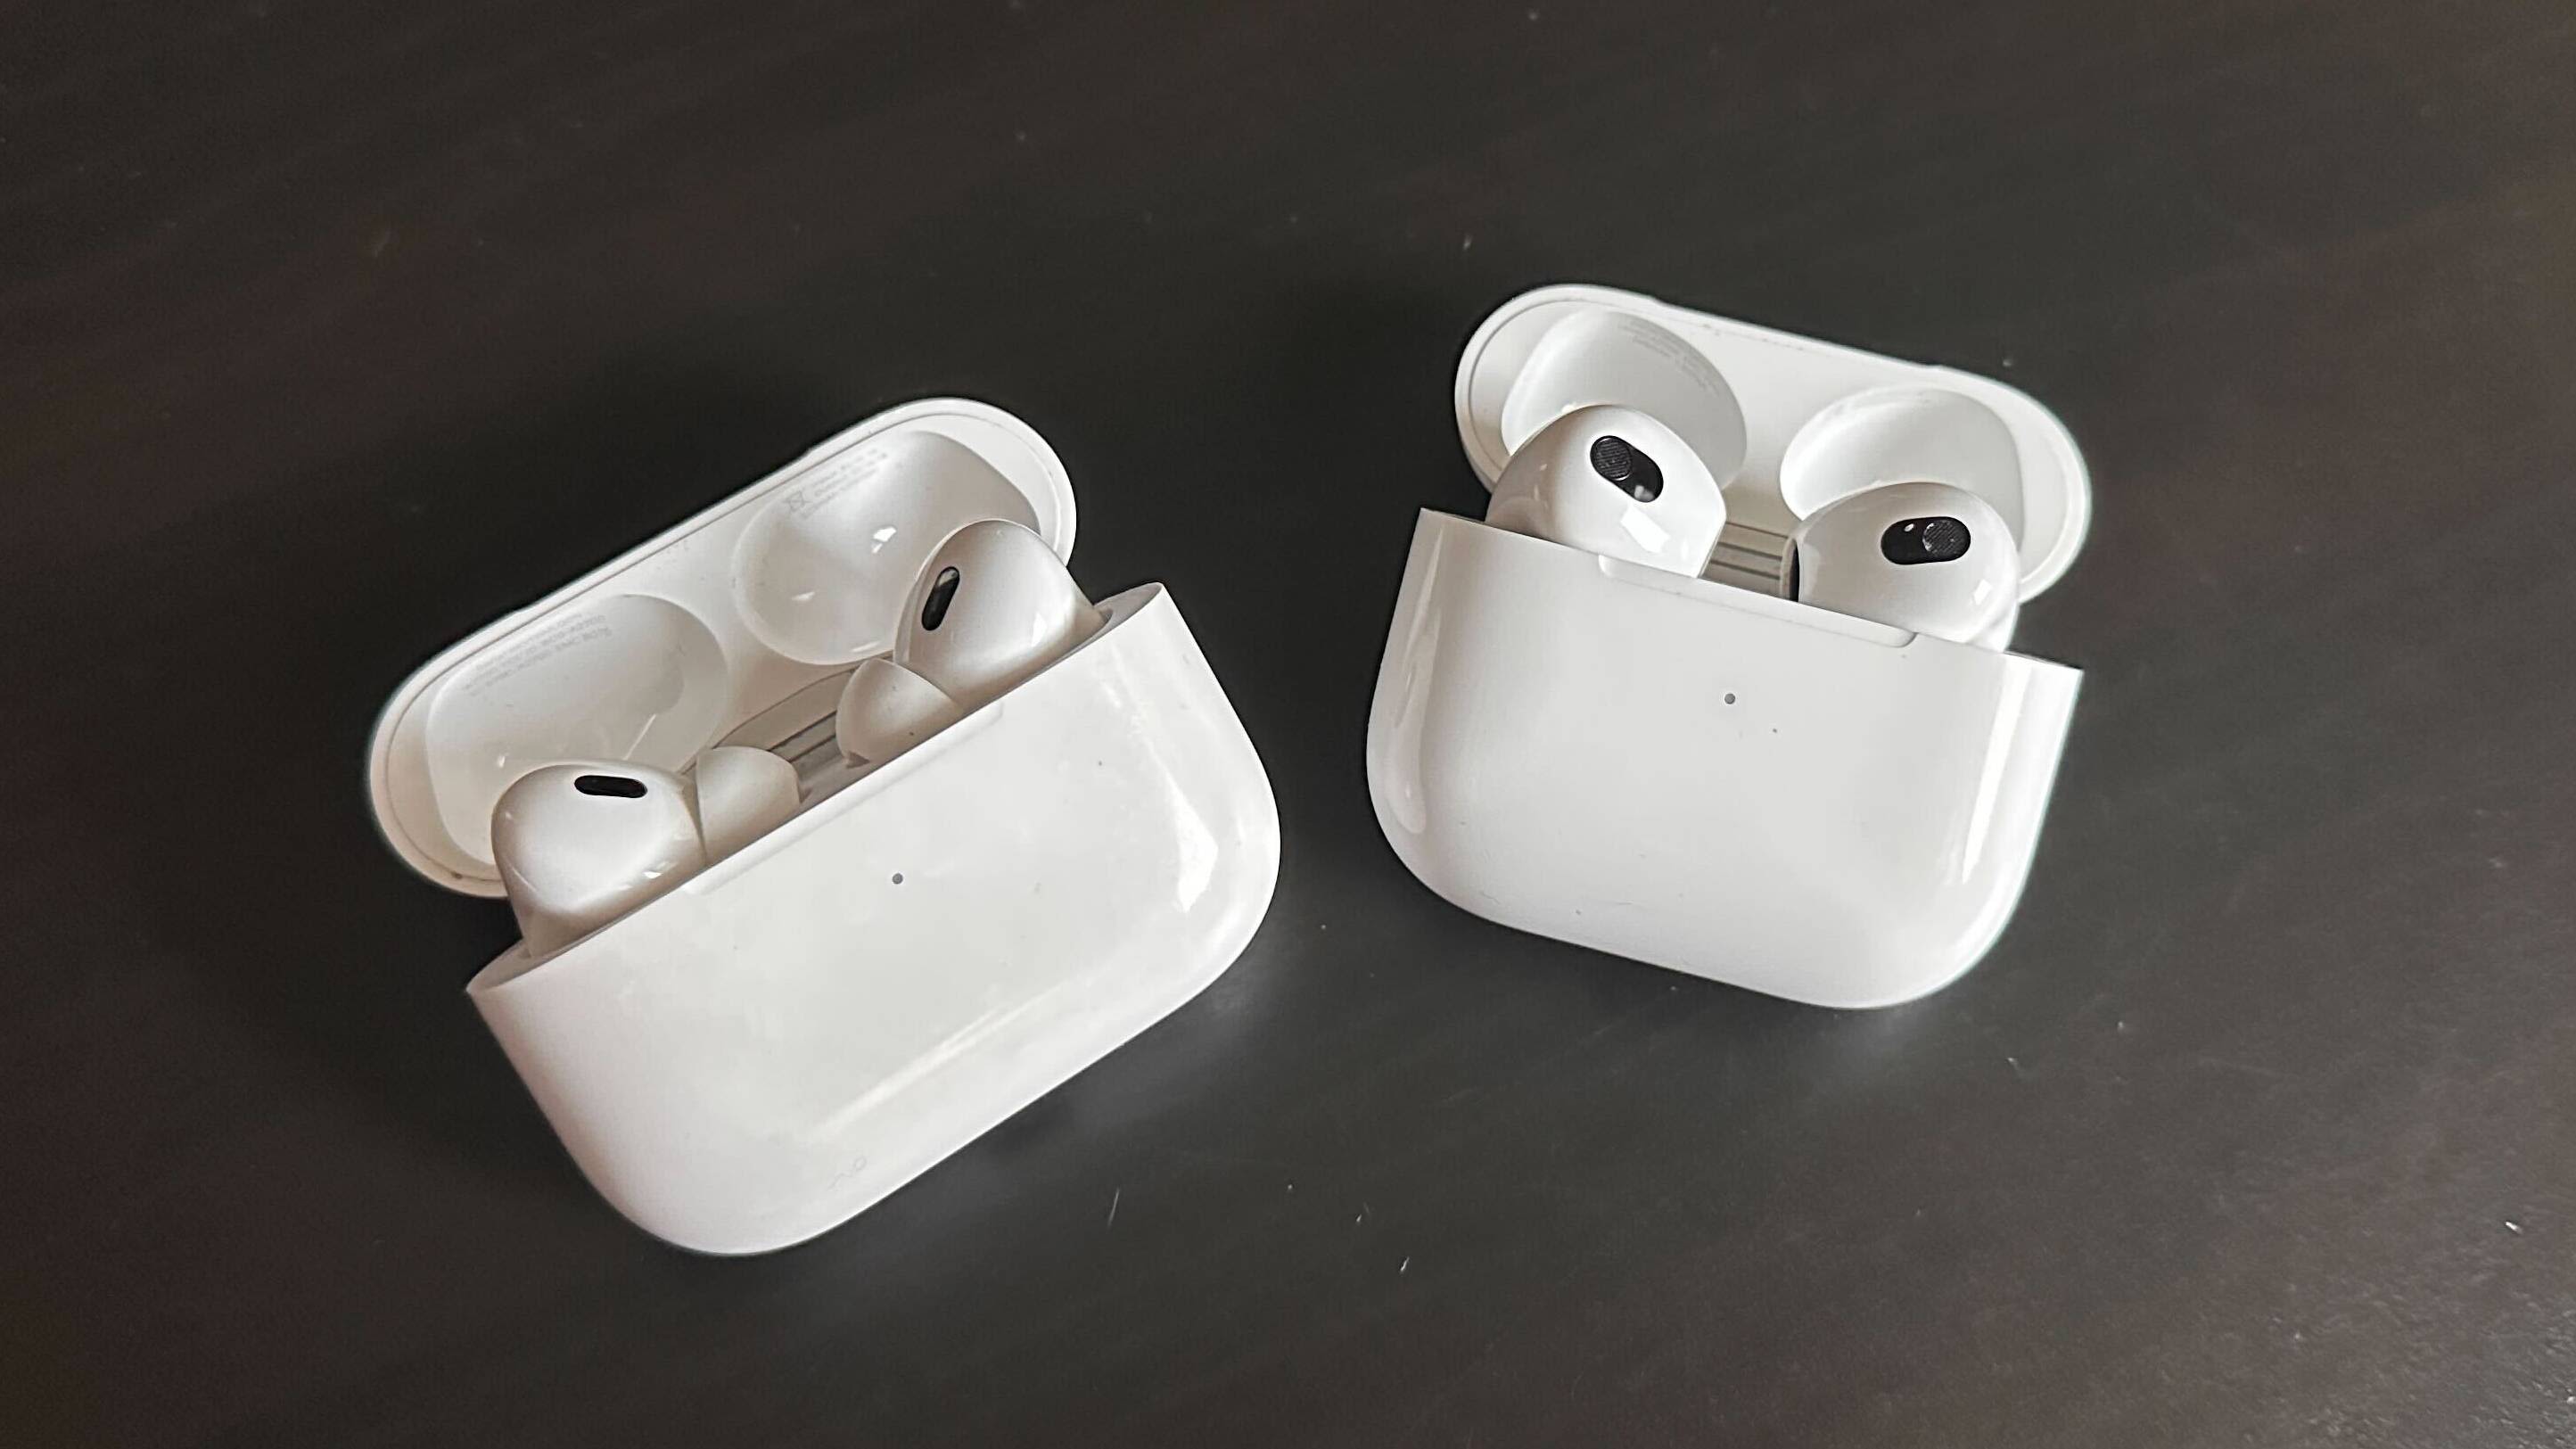 AirPods Pro 2 vs AirPods 3: which earbuds are for you?